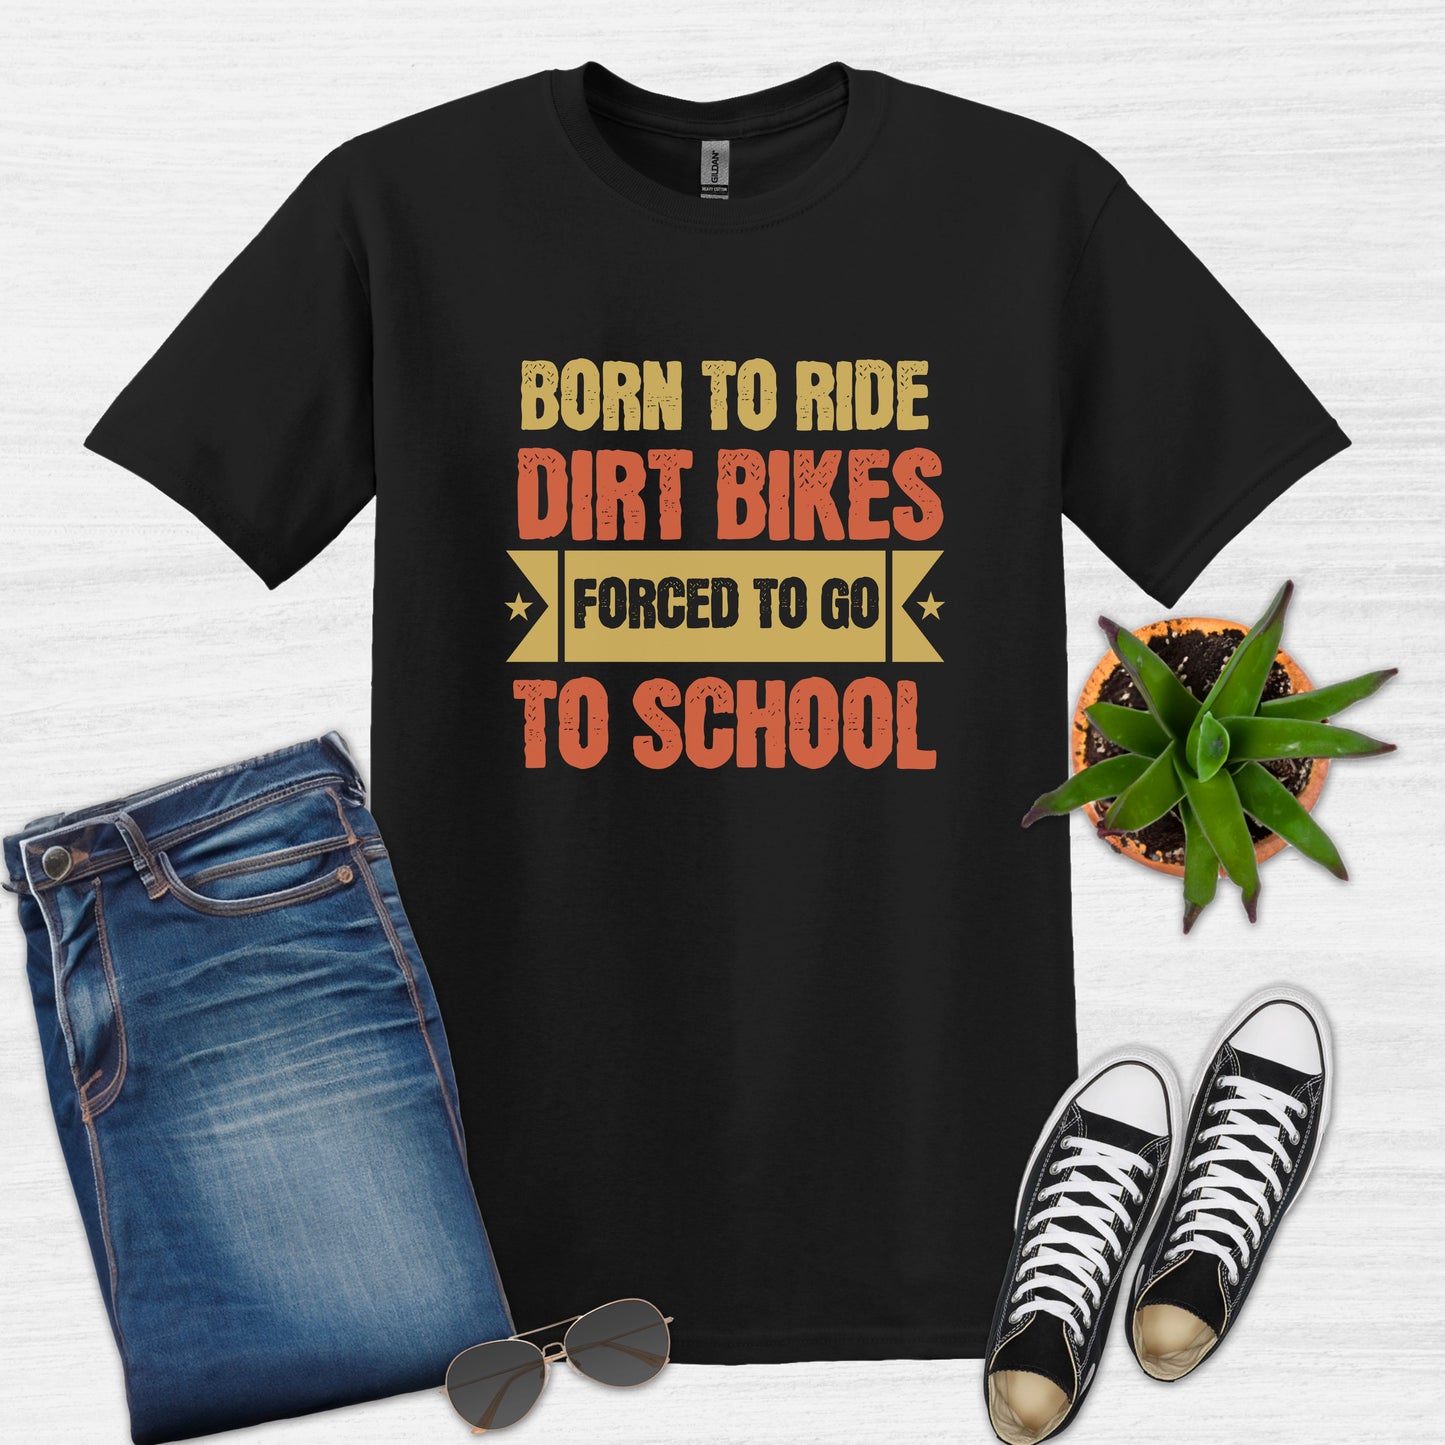 Bike Bliss Born to Ride Dirt Bikes Forced to go to School T-shirt for Men Black